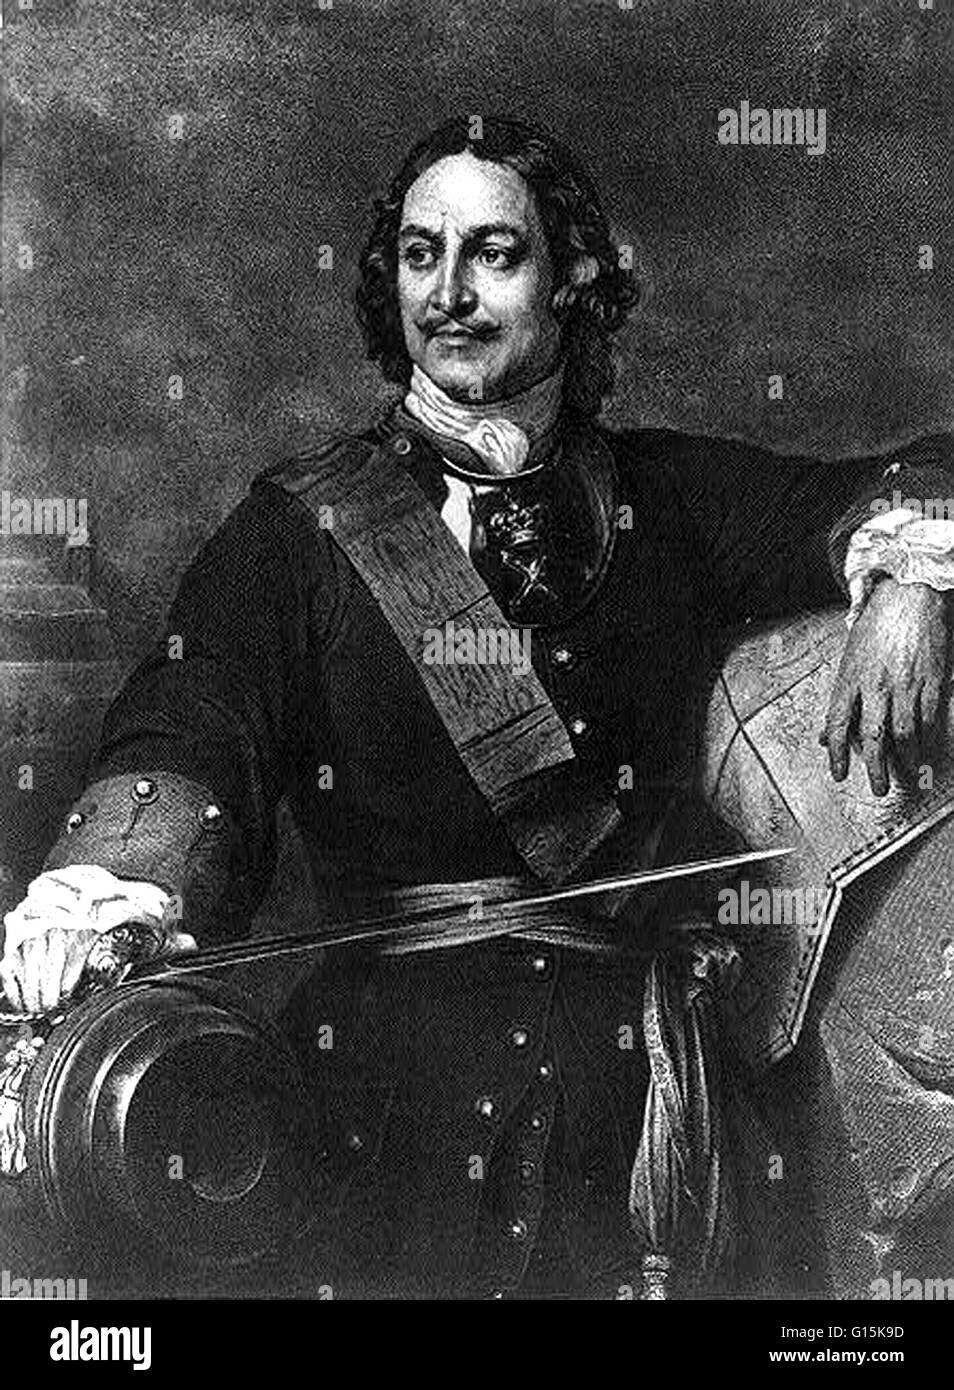 Peter the Great (1672-1725) ruled the Tsardom of Russia and later the Russian Empire from1682 until his death, jointly ruling before 1696 with his half-brother. In numerous successful wars he expanded the Tsardom into a huge empire that became a major Eur Stock Photo